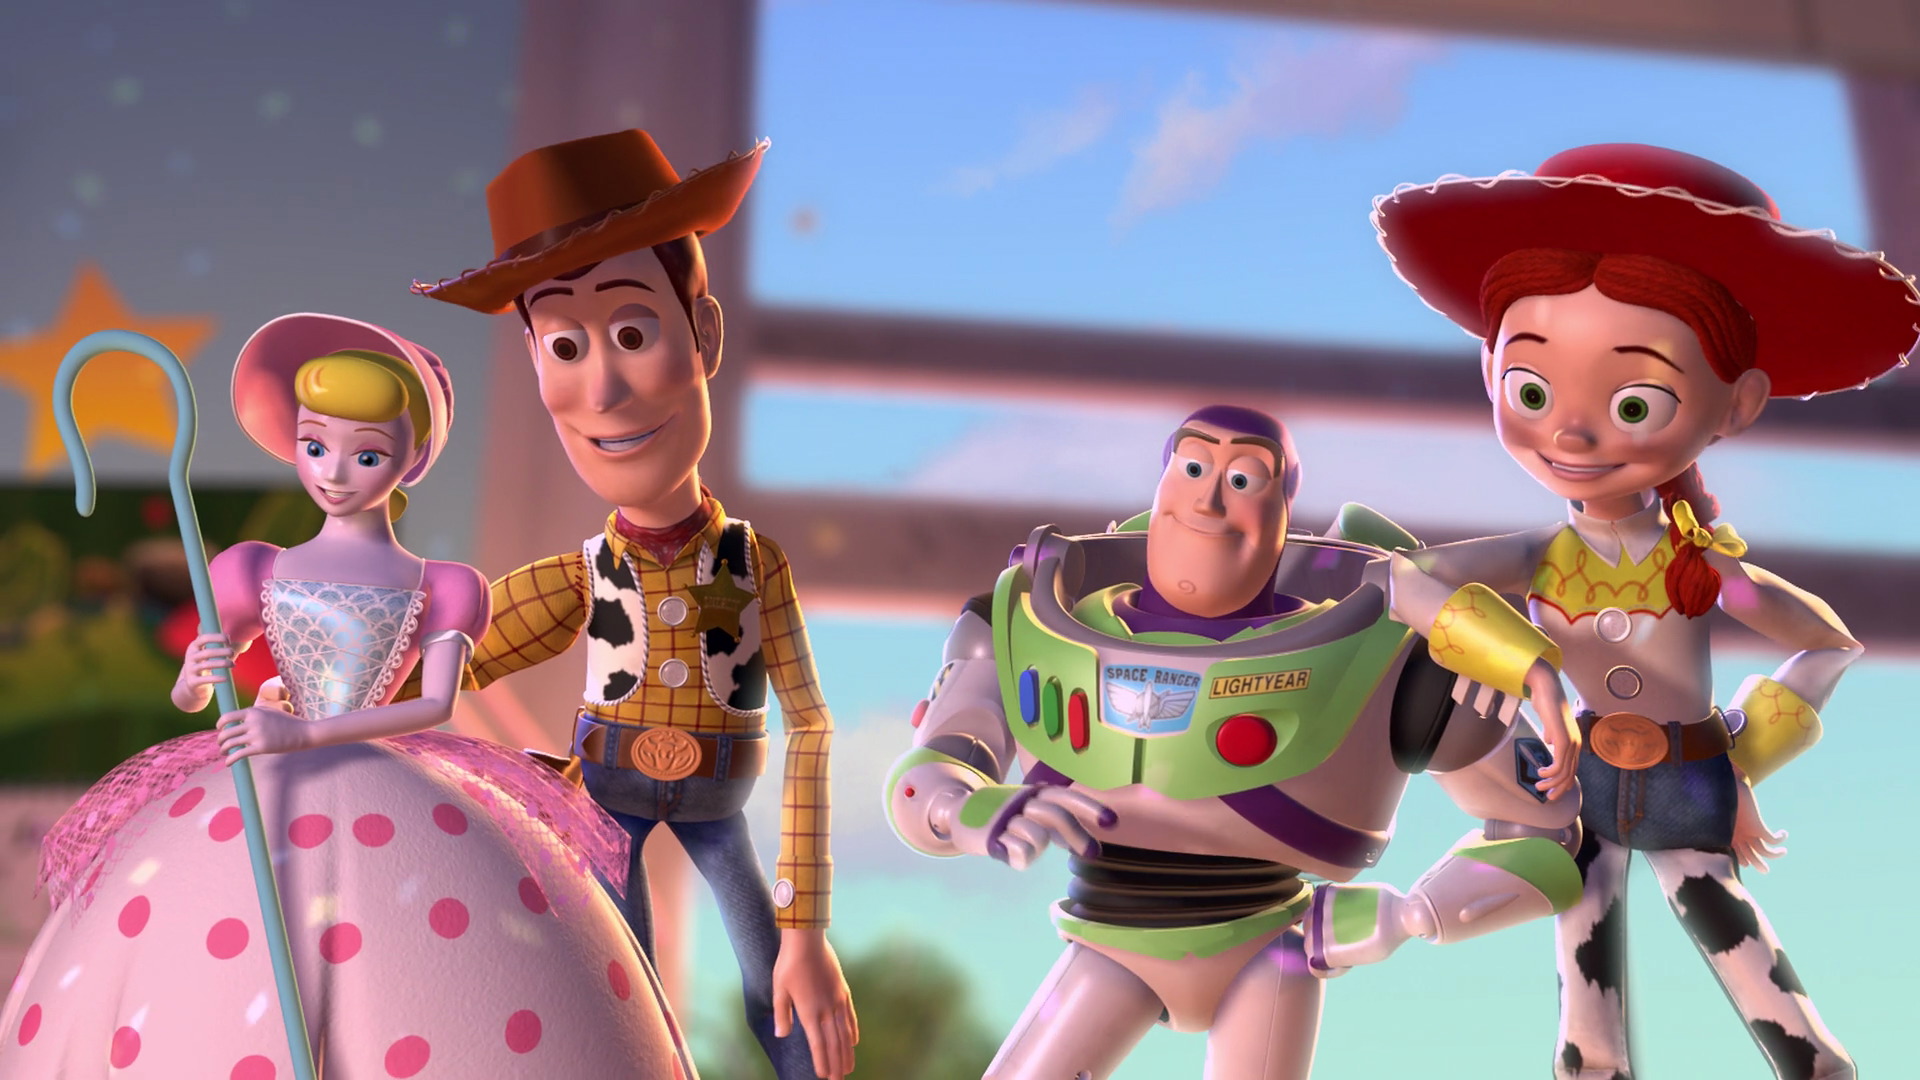 Toy Story 3 instal the new version for windows